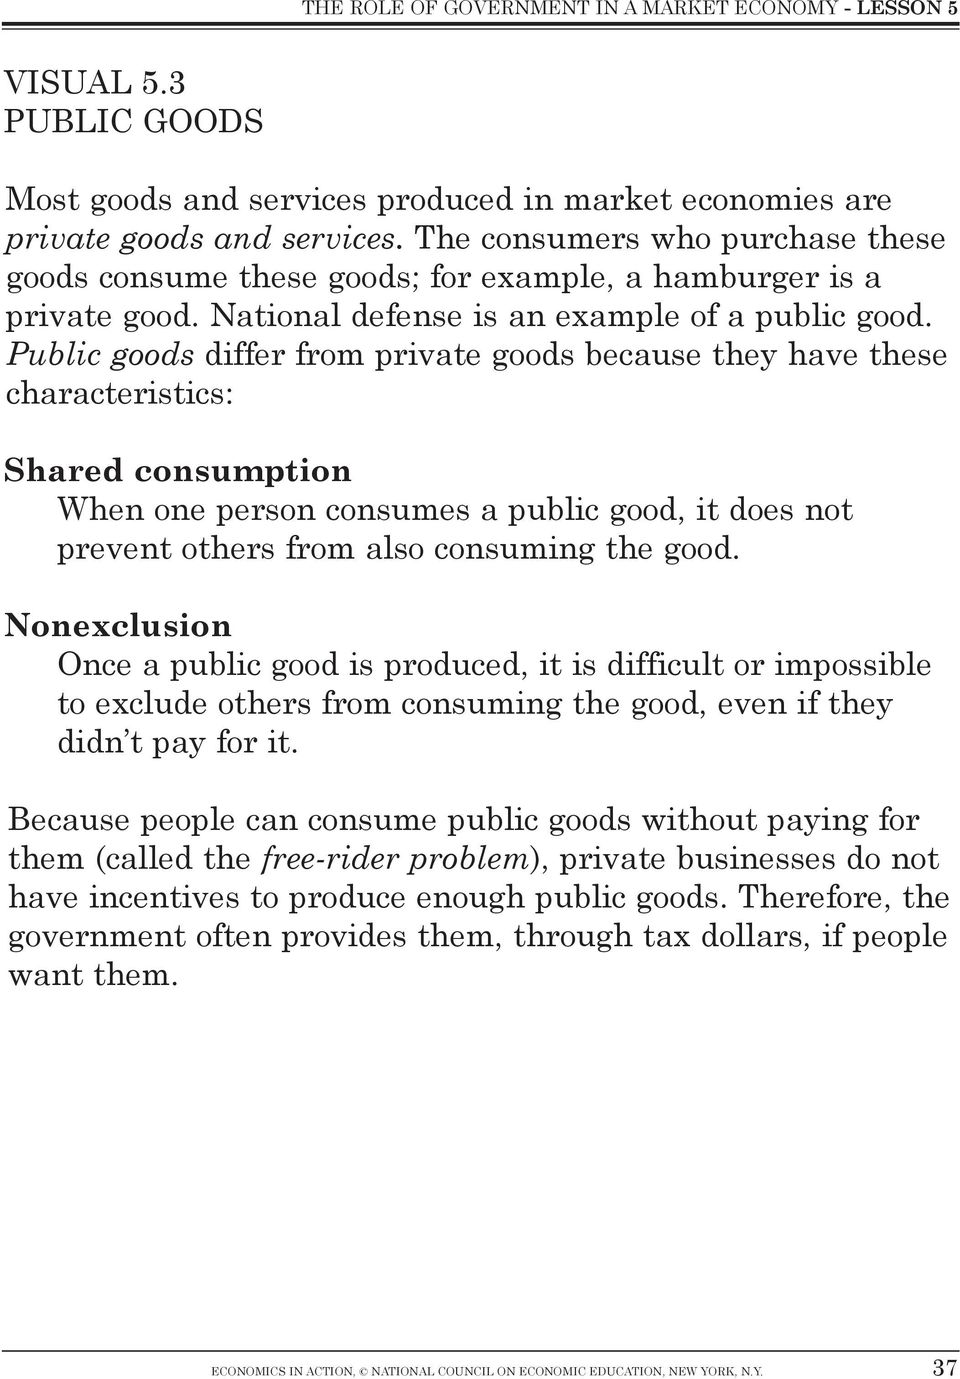 Public goods differ from private goods because they have these characteristics: Shared consumption When one person consumes a public good, it does not prevent others from also consuming the good.